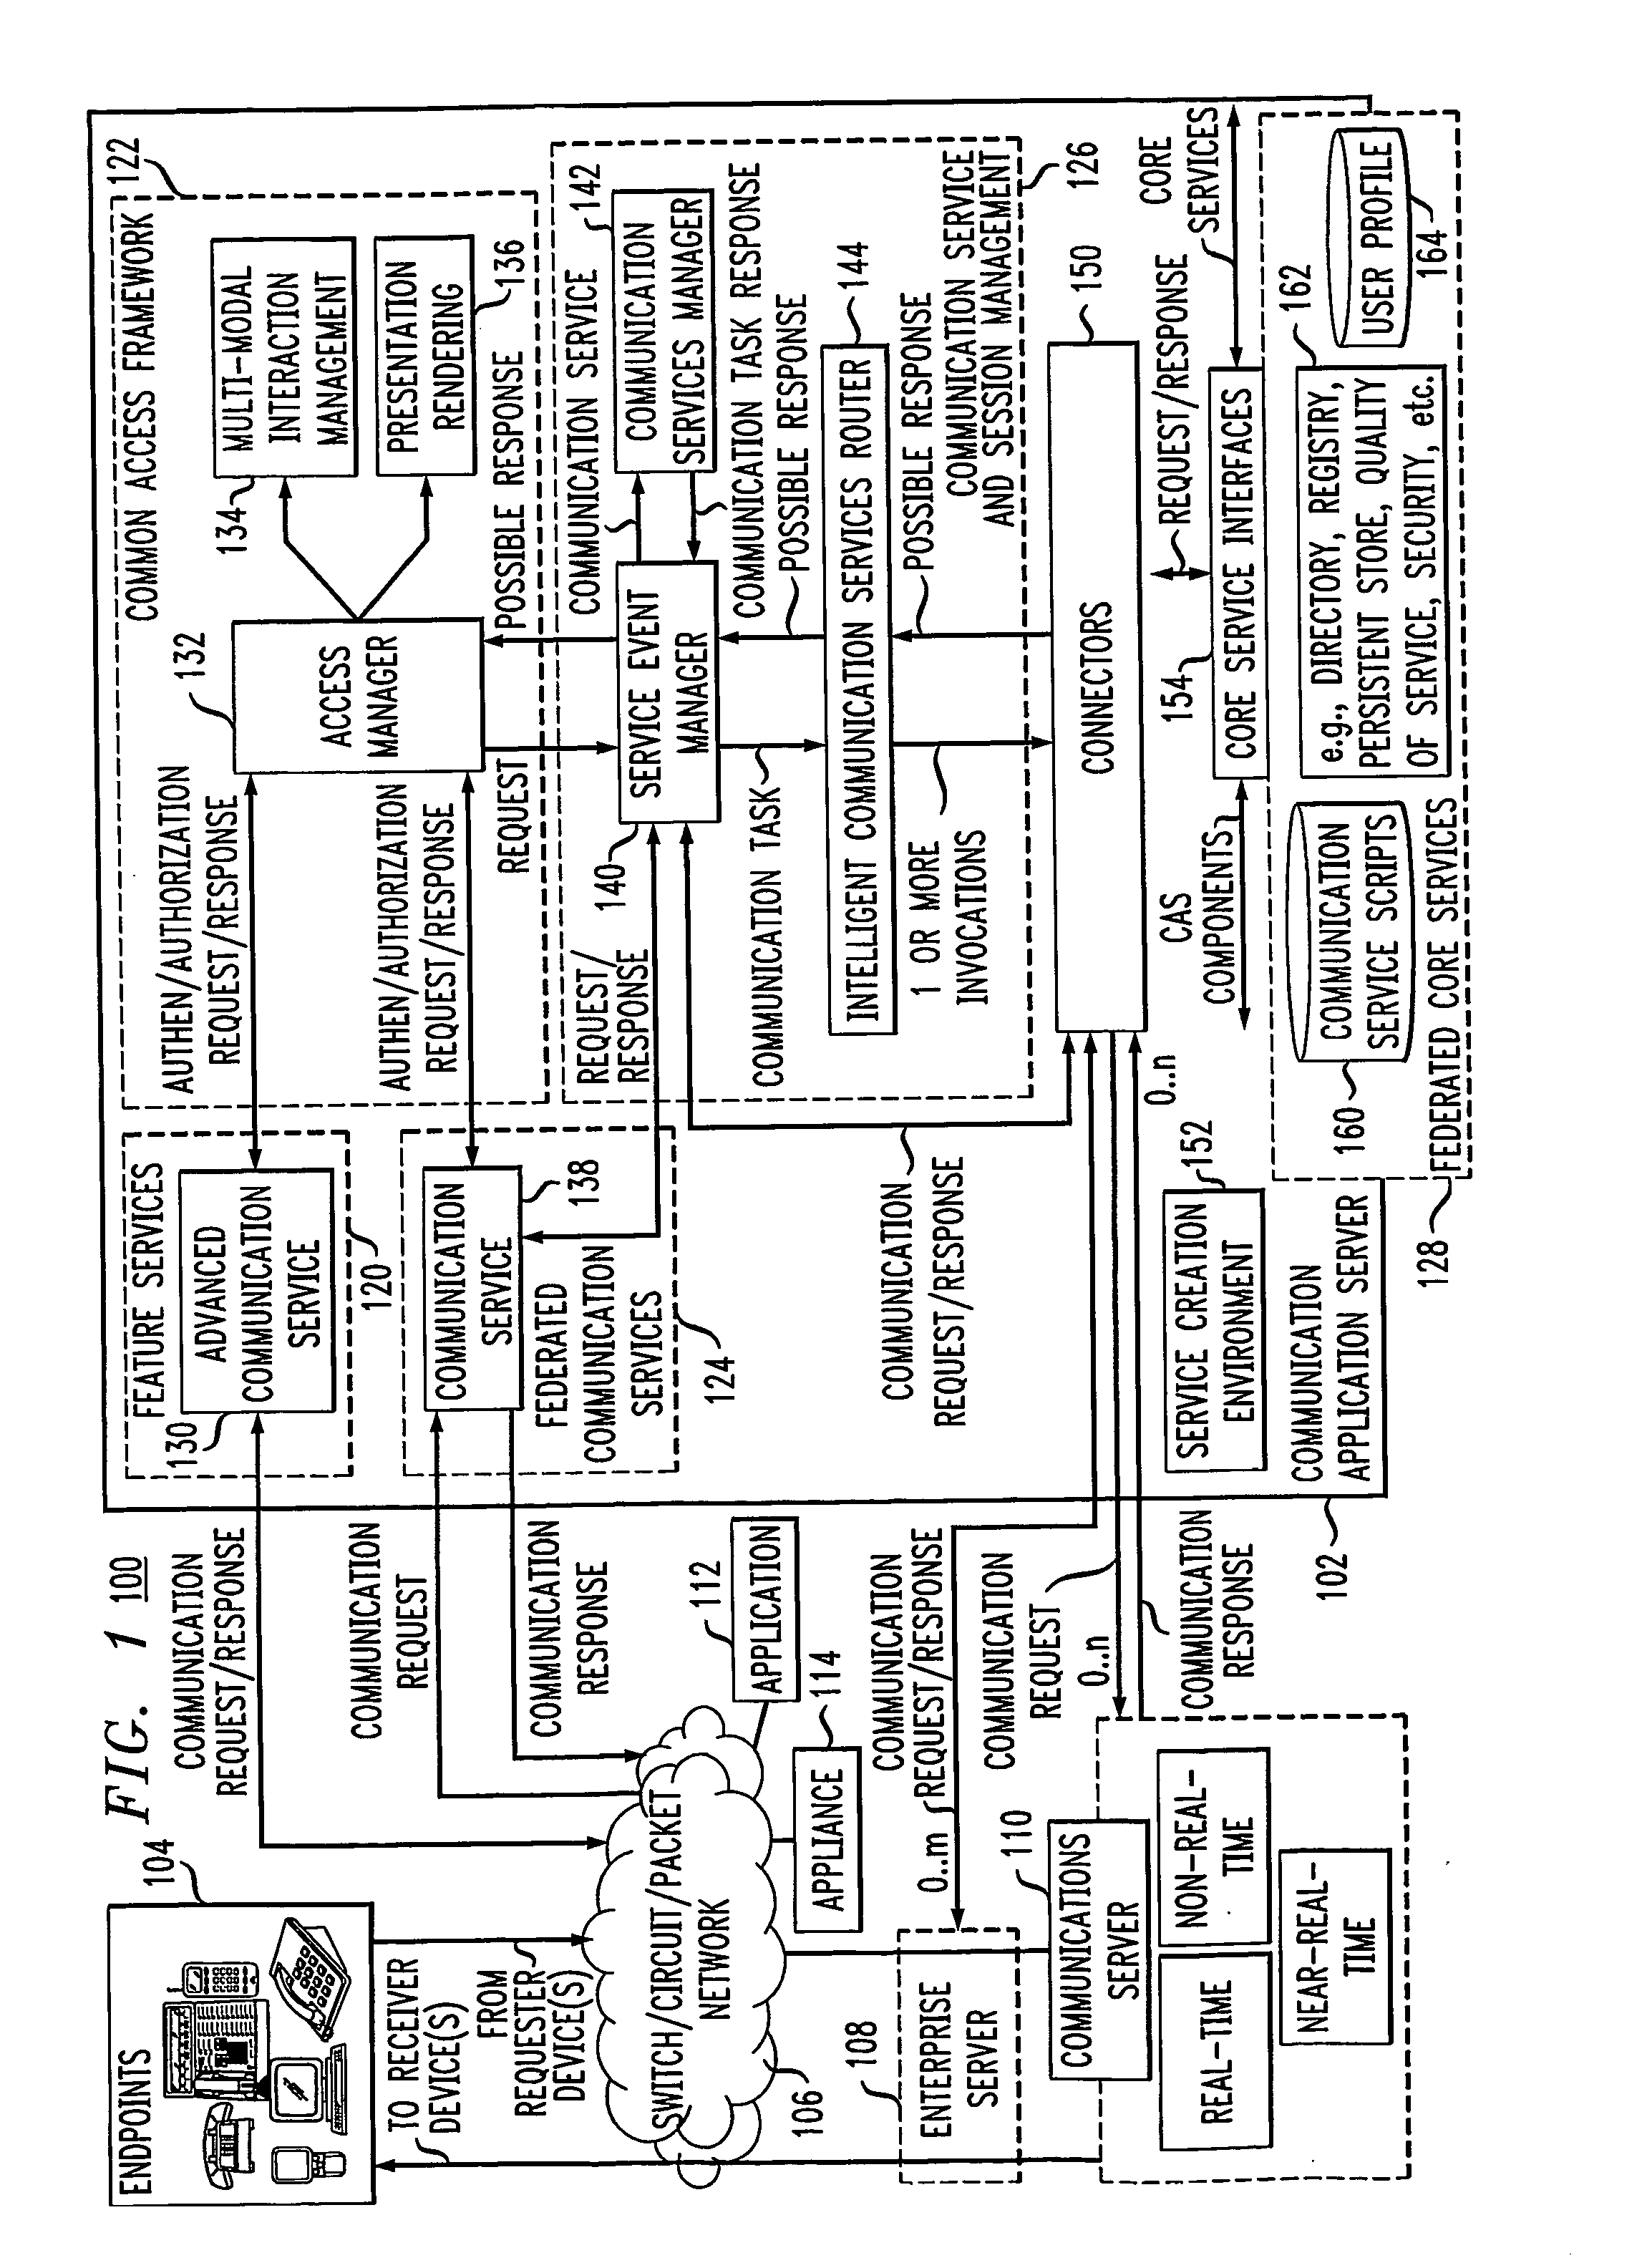 Communication application server for converged communication services